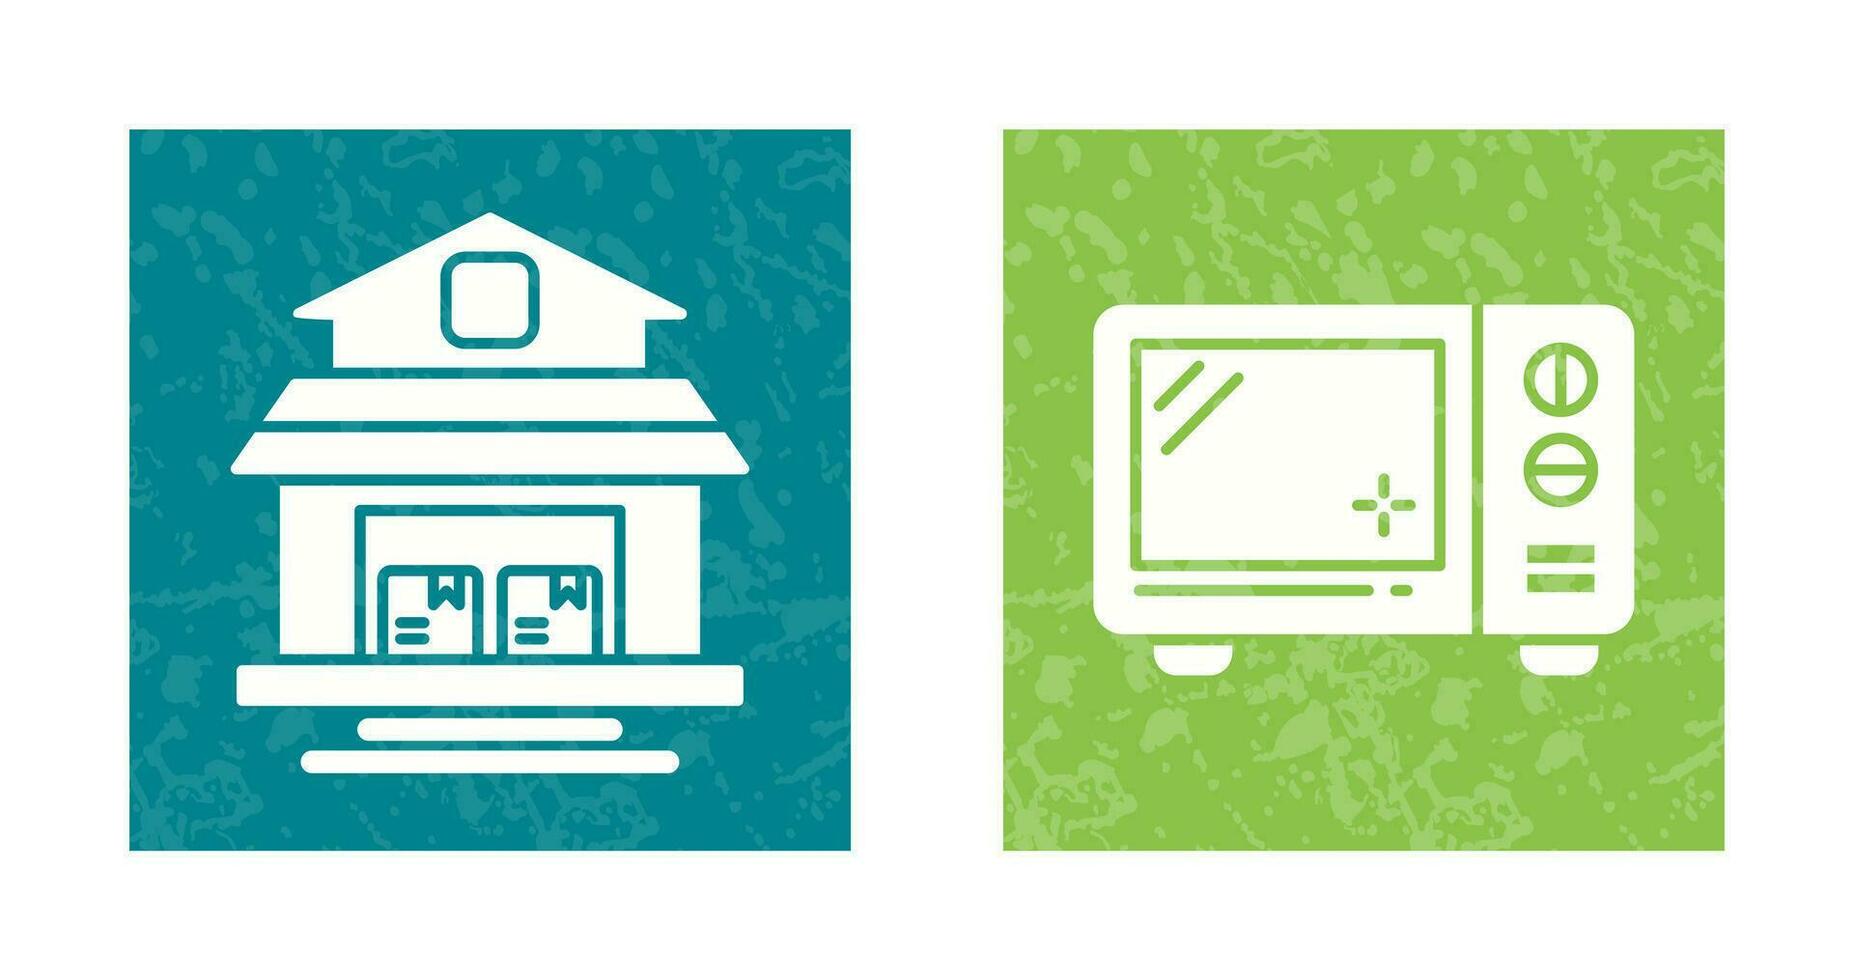 Warehouse and Microwave Icon vector